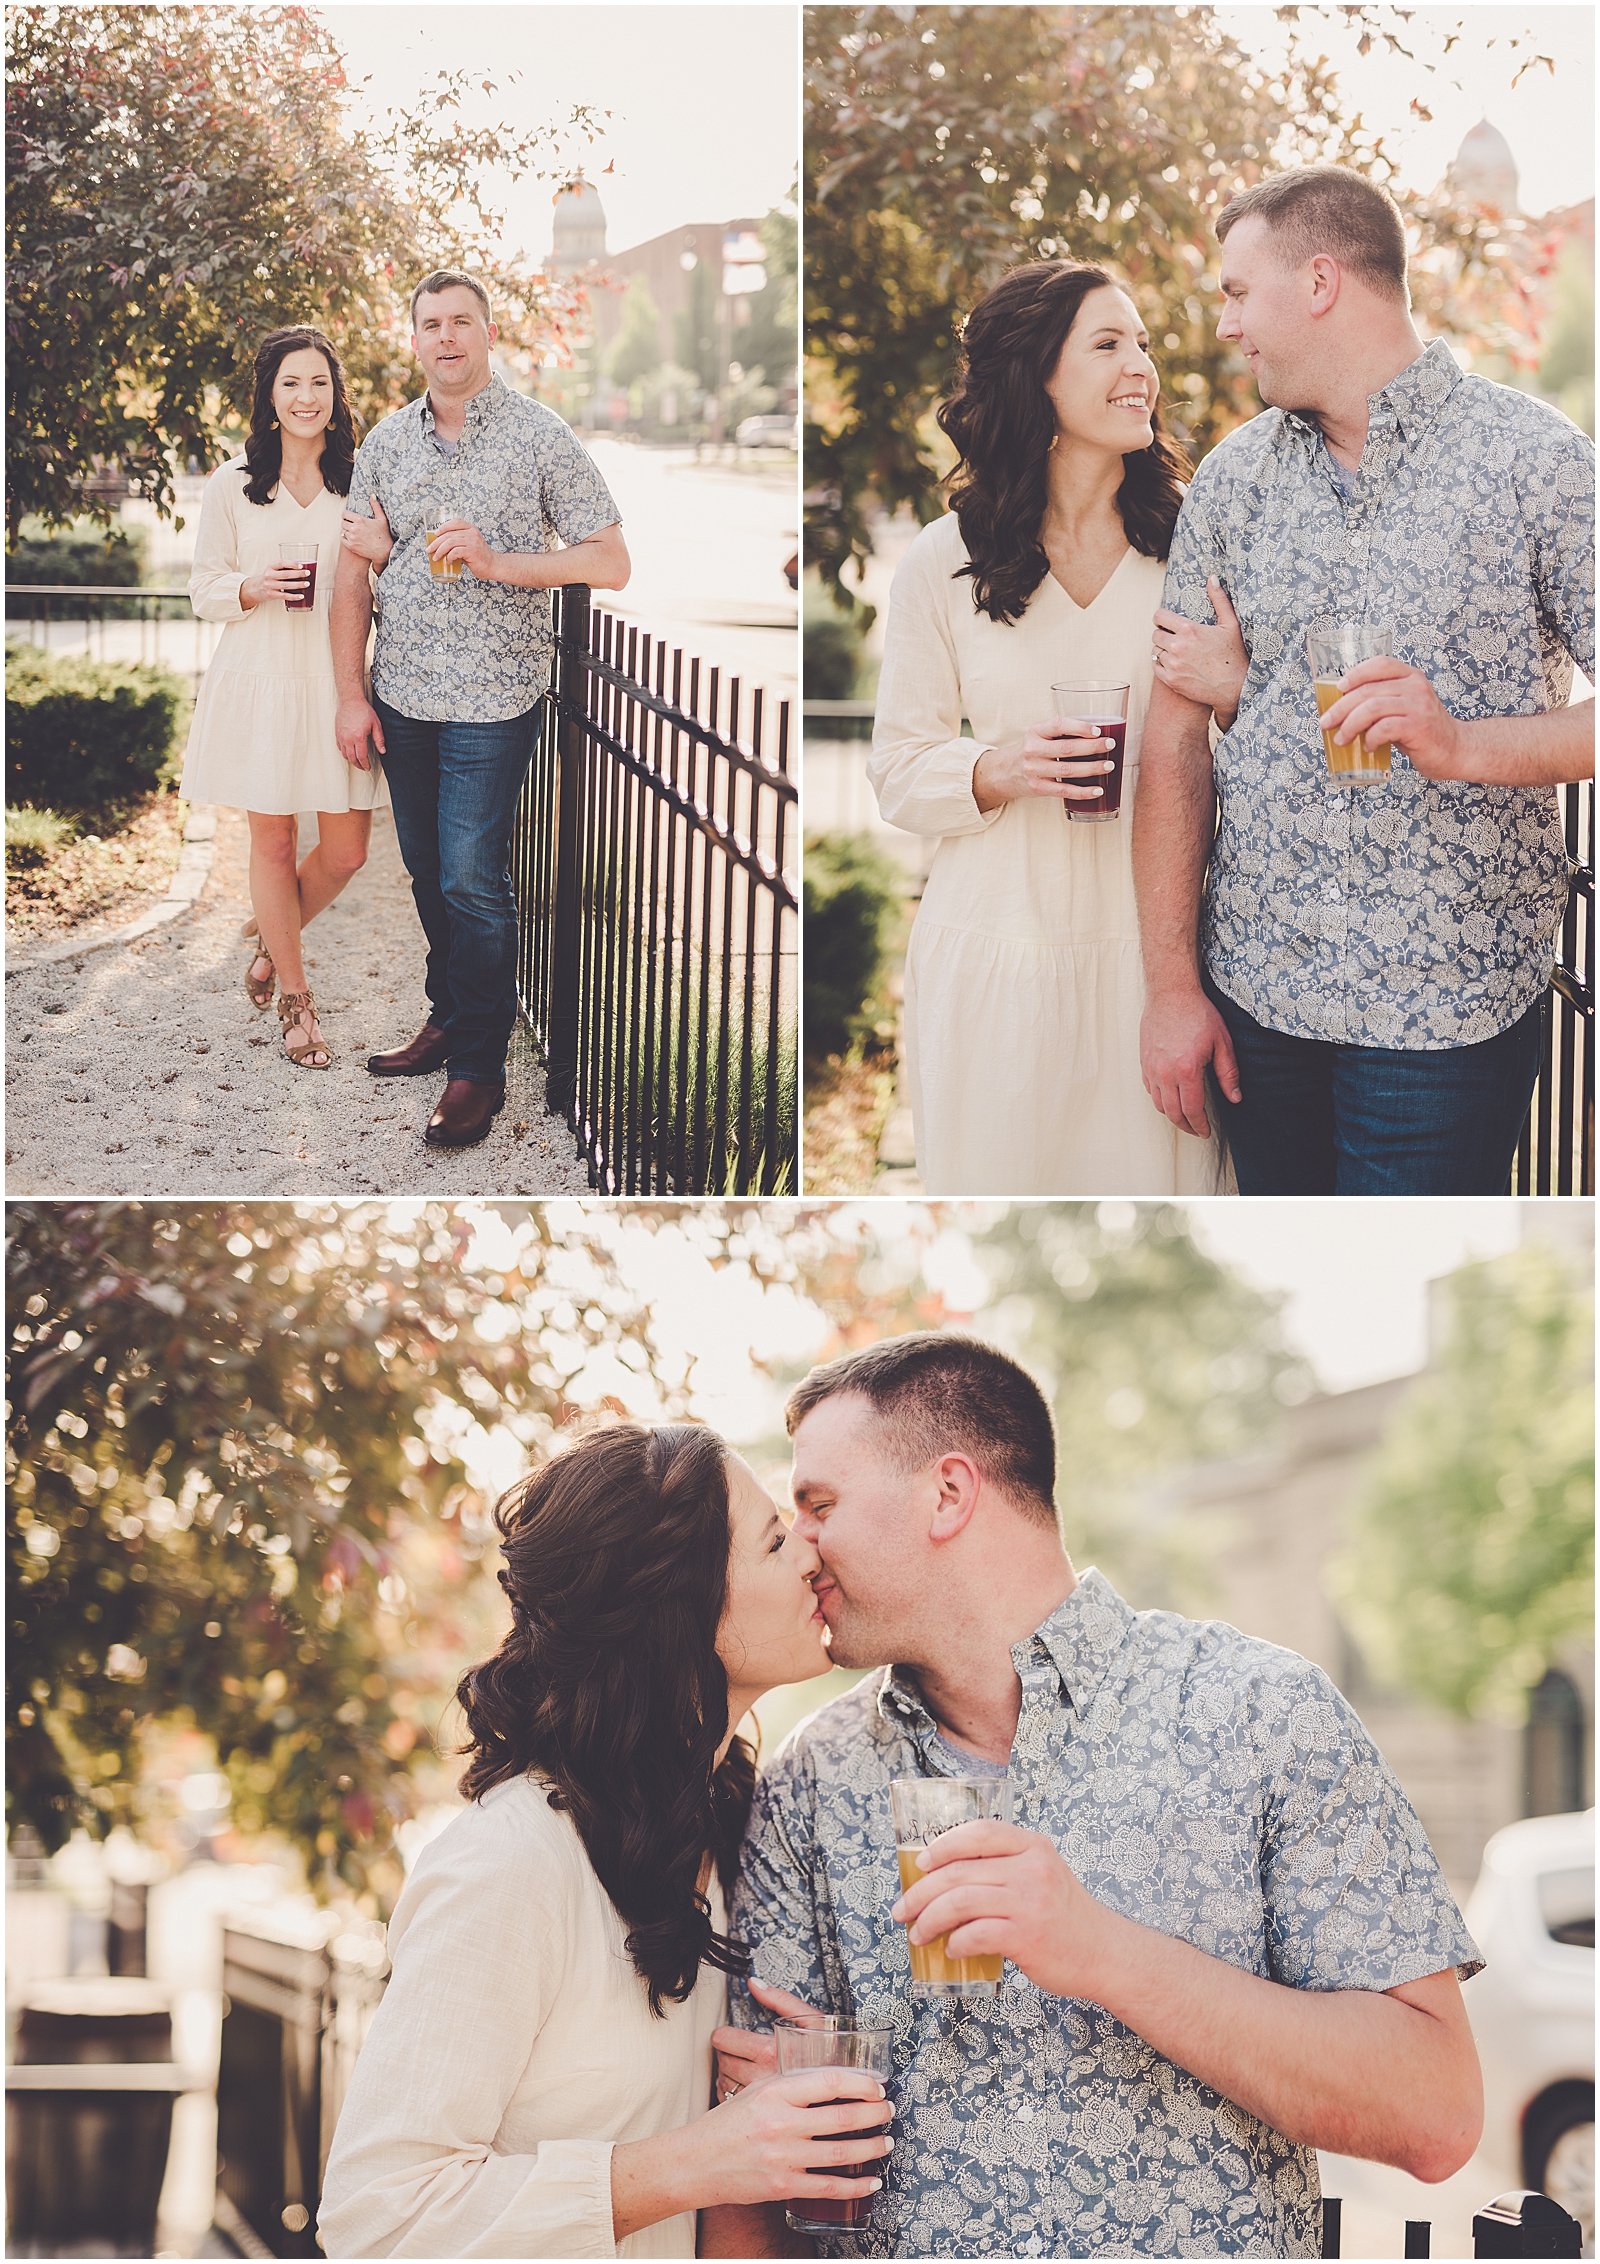 Allye & Grant's downtown engagement session at Obed & Isaac's in Springfield, Illinois with Chicagoland wedding photographer Kara Evans Photographer.